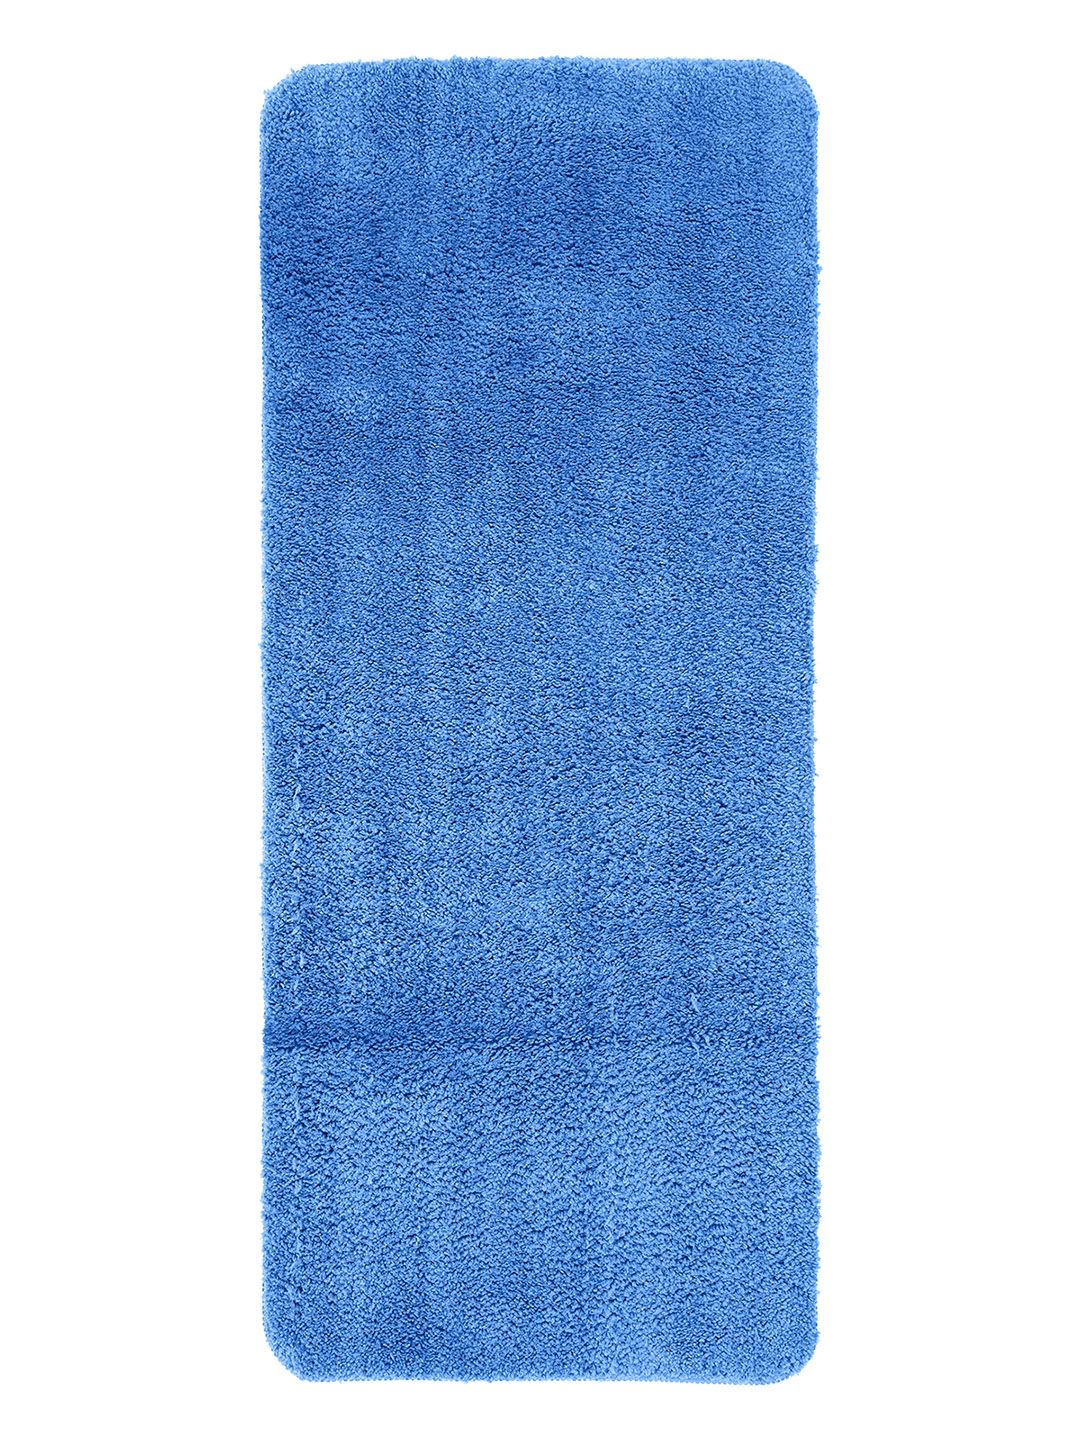 OBSESSIONS Blue Solid Diana Anti-Skid Bath Rug Price in India